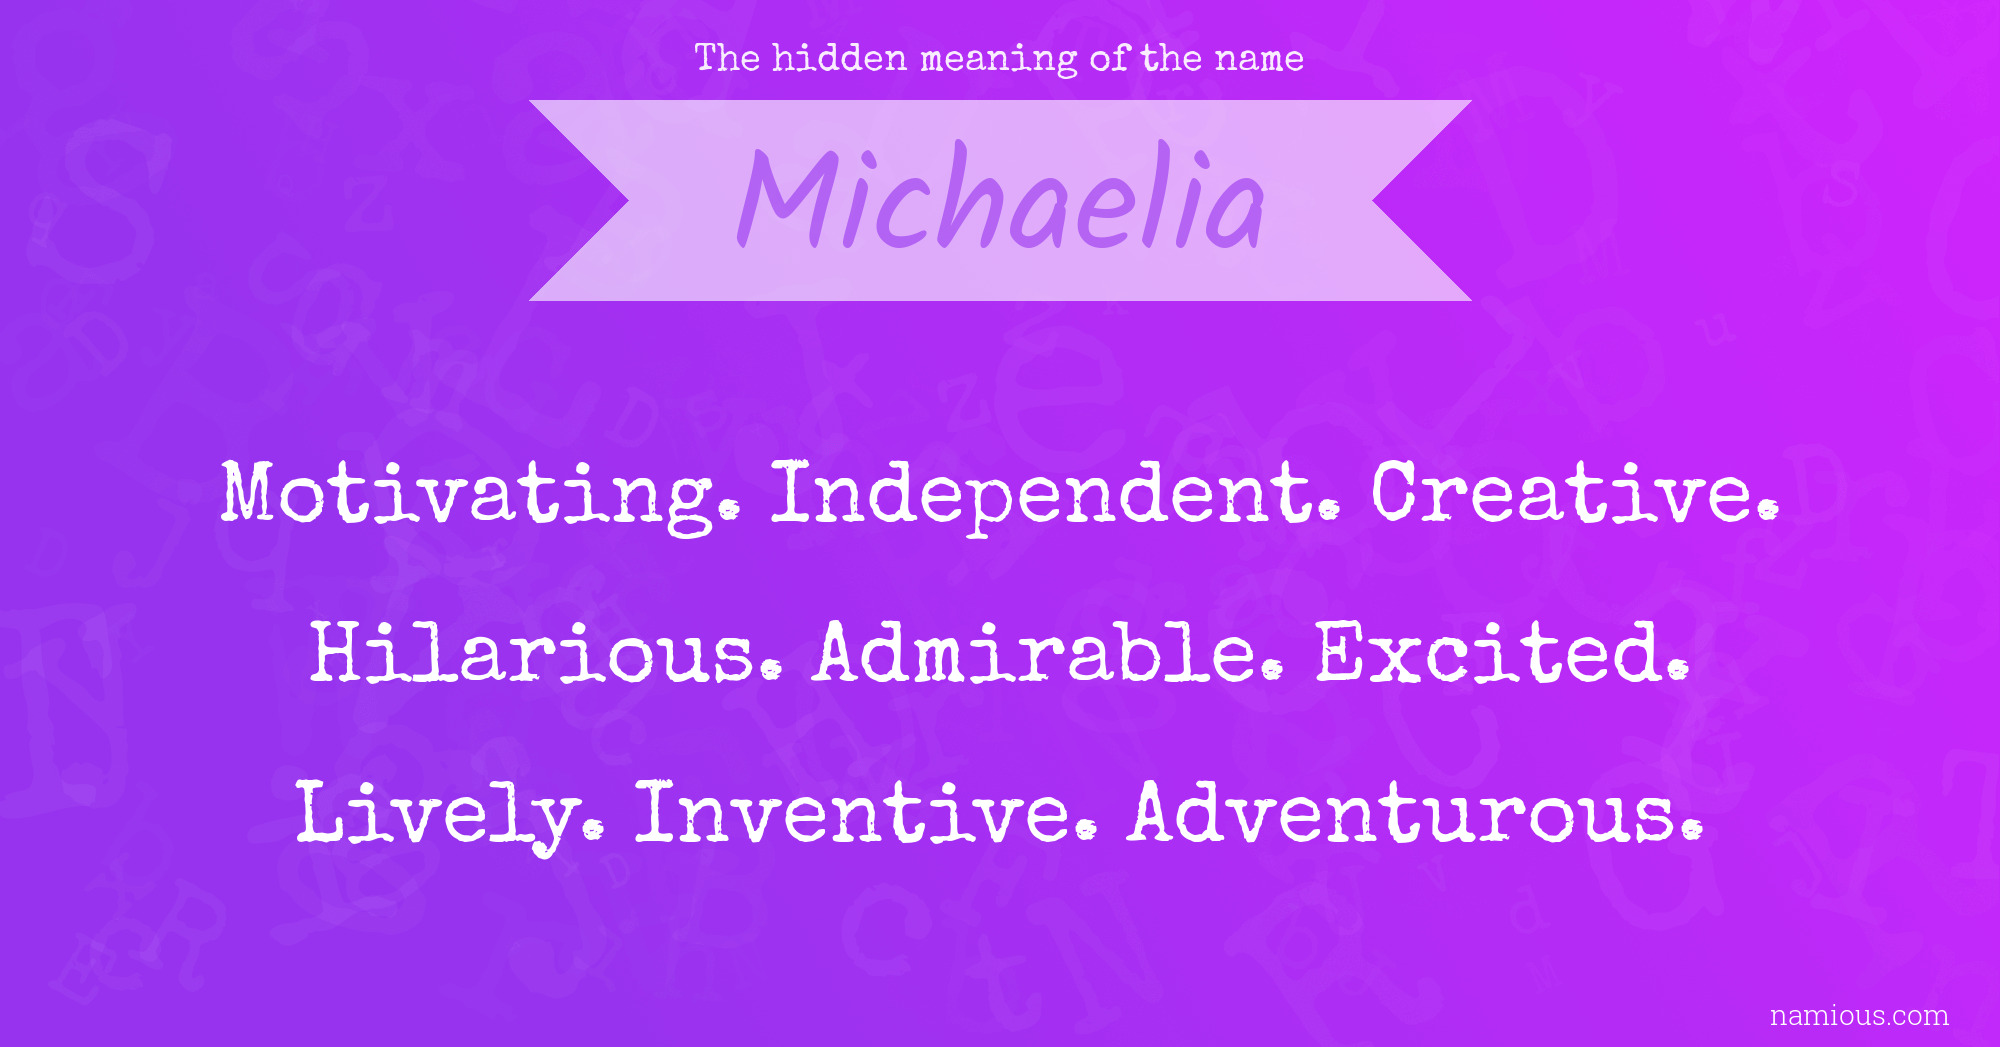 The hidden meaning of the name Michaelia